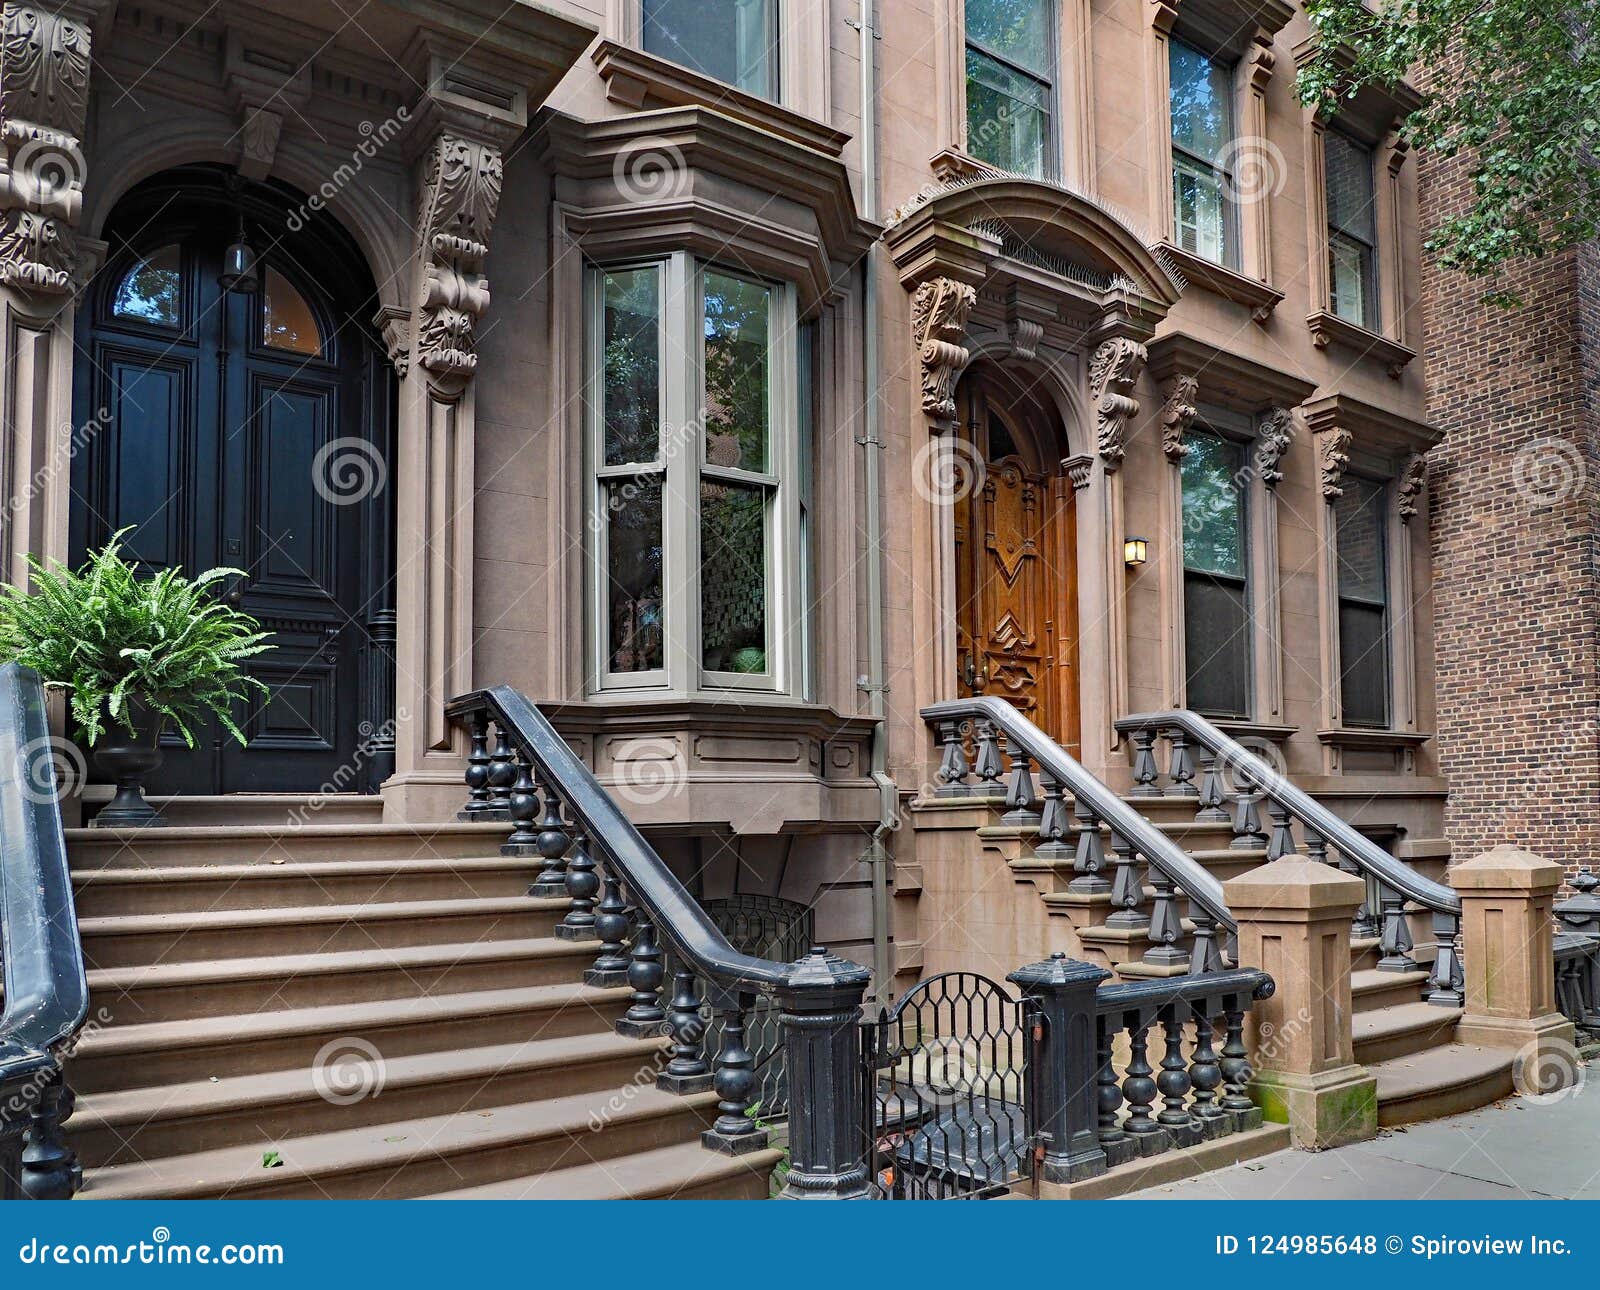 New York brownstone stock photo. Image of entrance, steps - 124985648